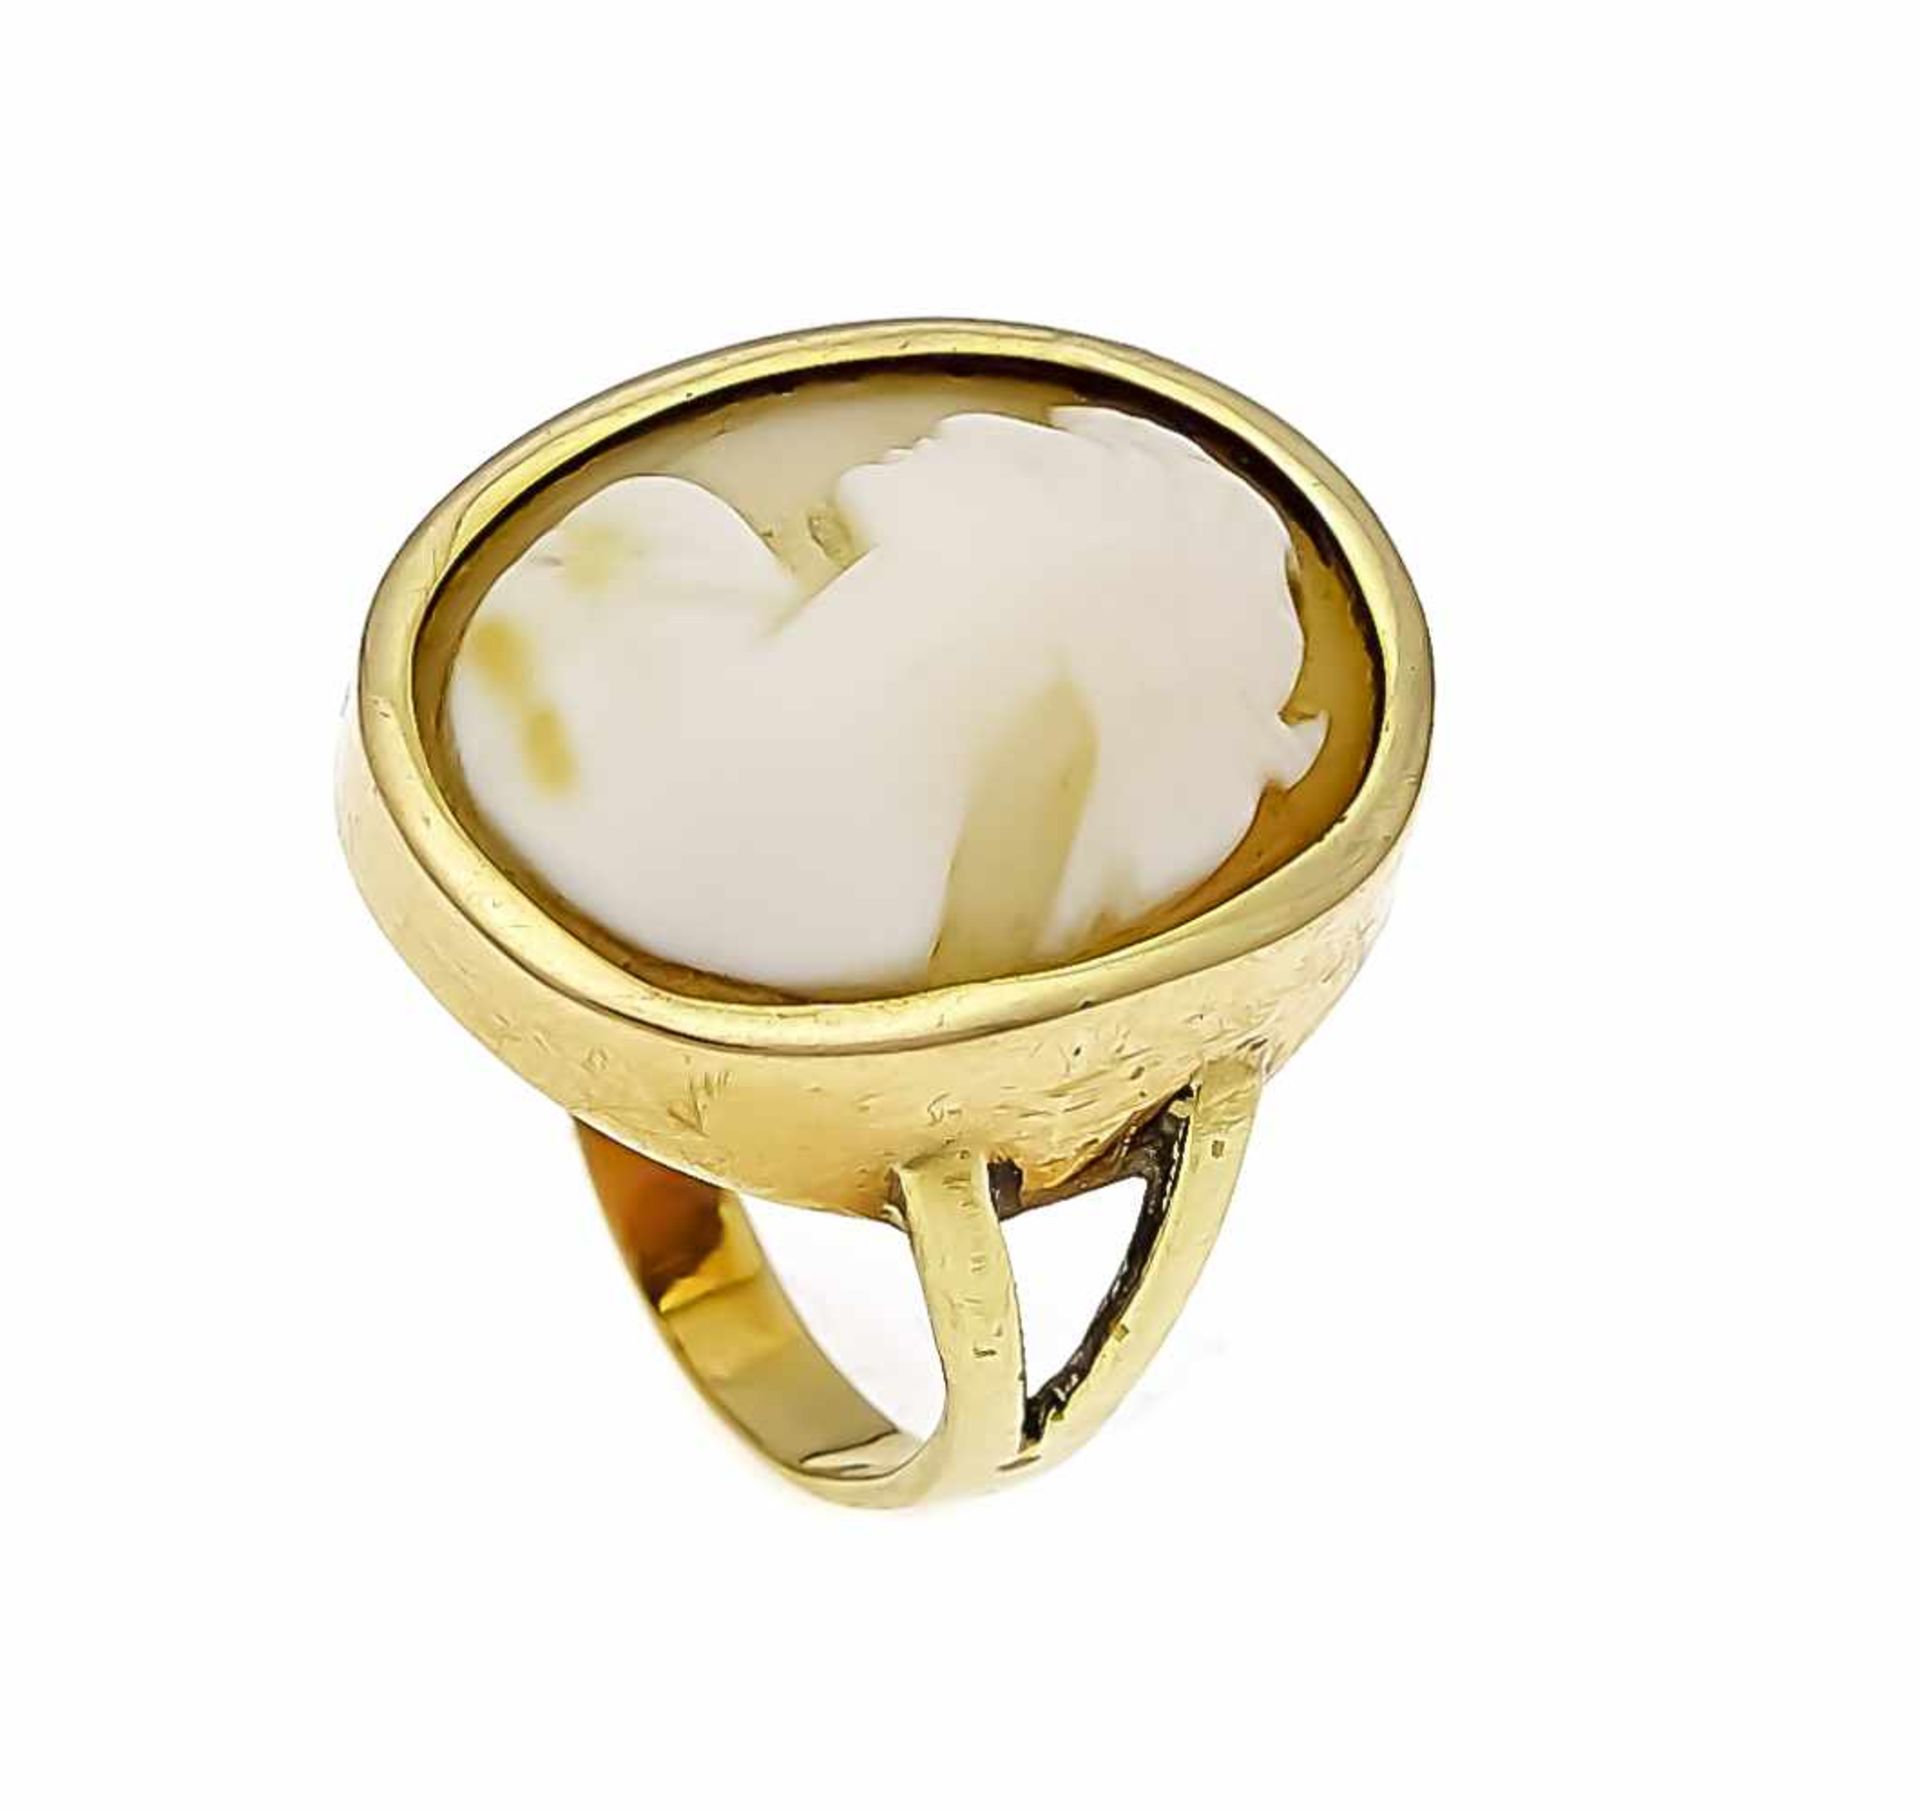 Gemmen ring GG 585/000 with an oval, carved shell gem 18.5 x 14 mm, ring size 50, 4.0 g